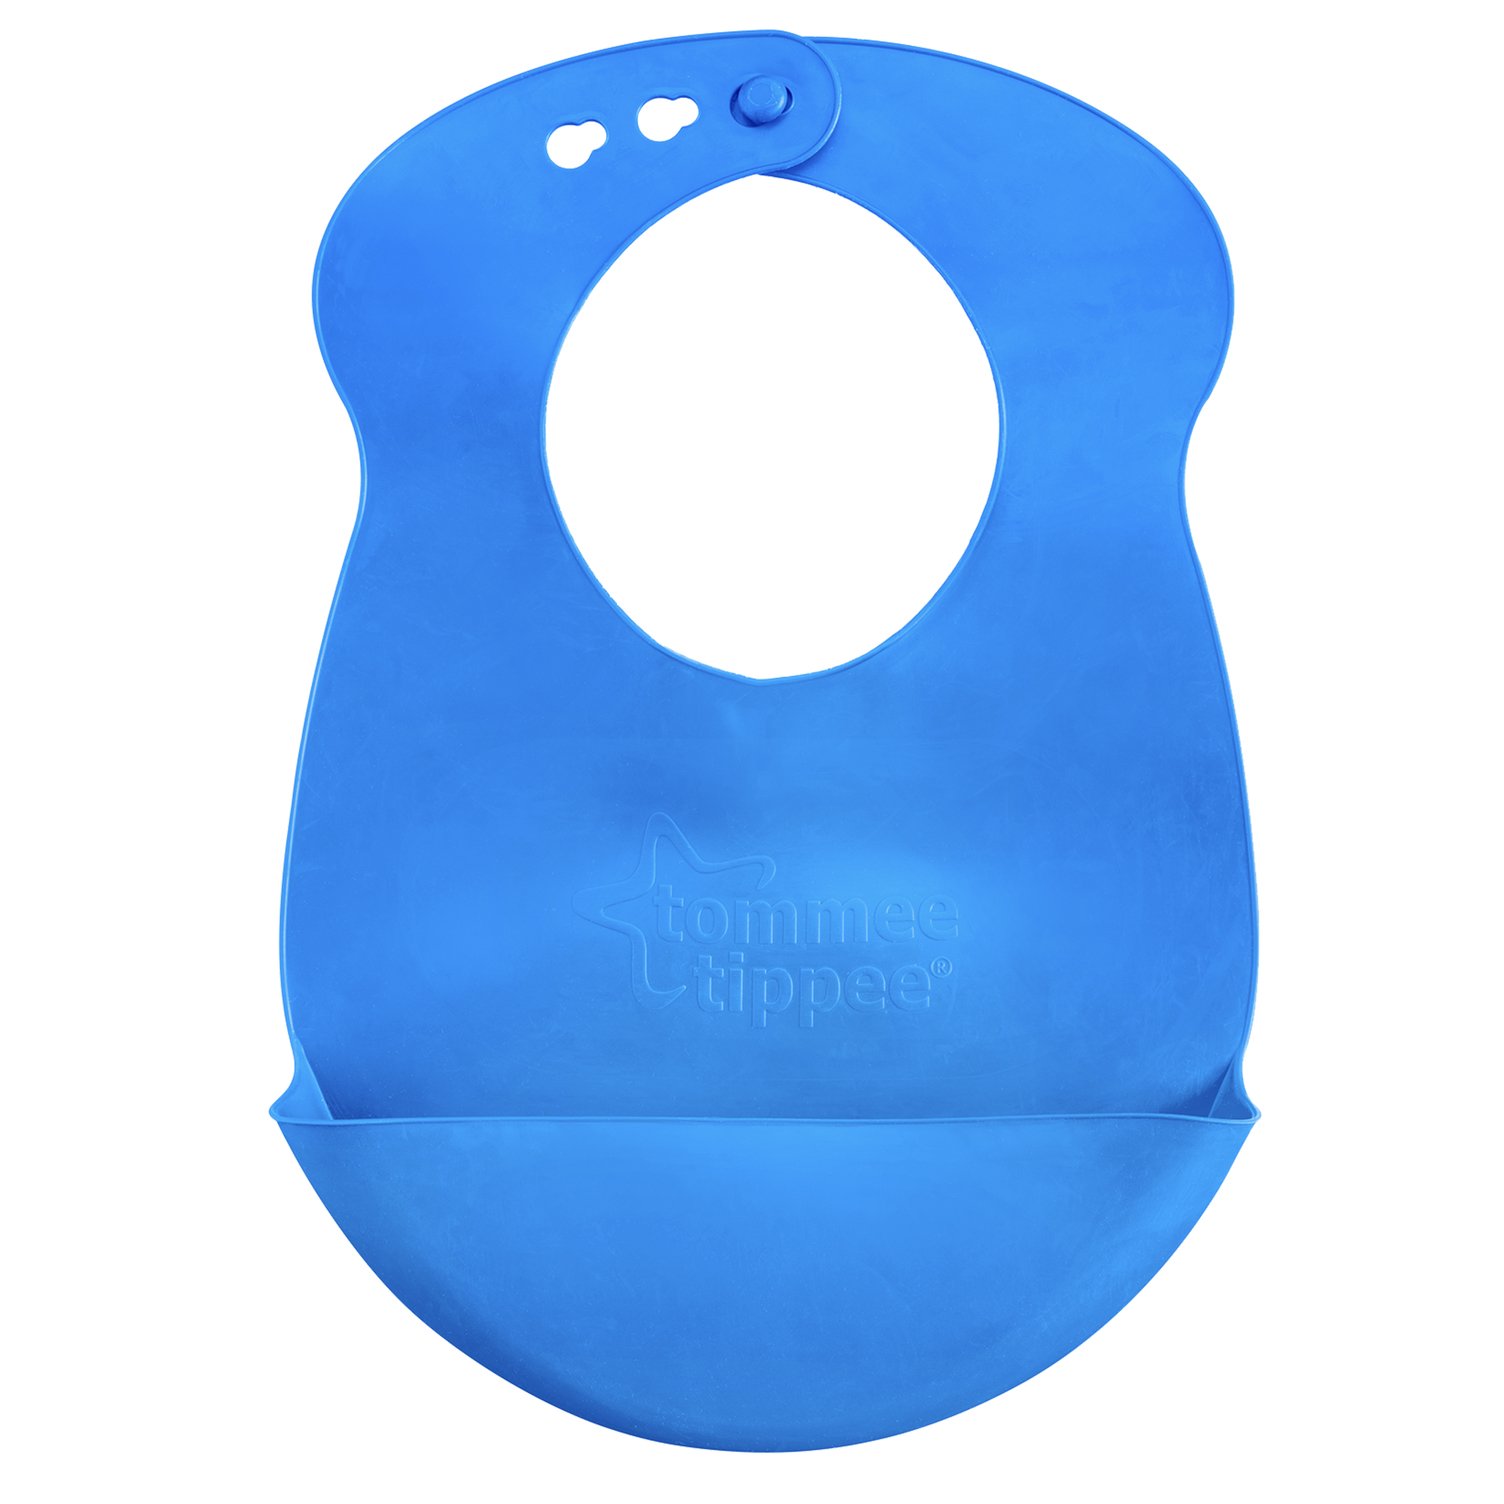 Tommee Tippee Easi-Roll Baby Bib, Crumb & Drip Catcher, Blue & Green - 7+ Months, 2 Count